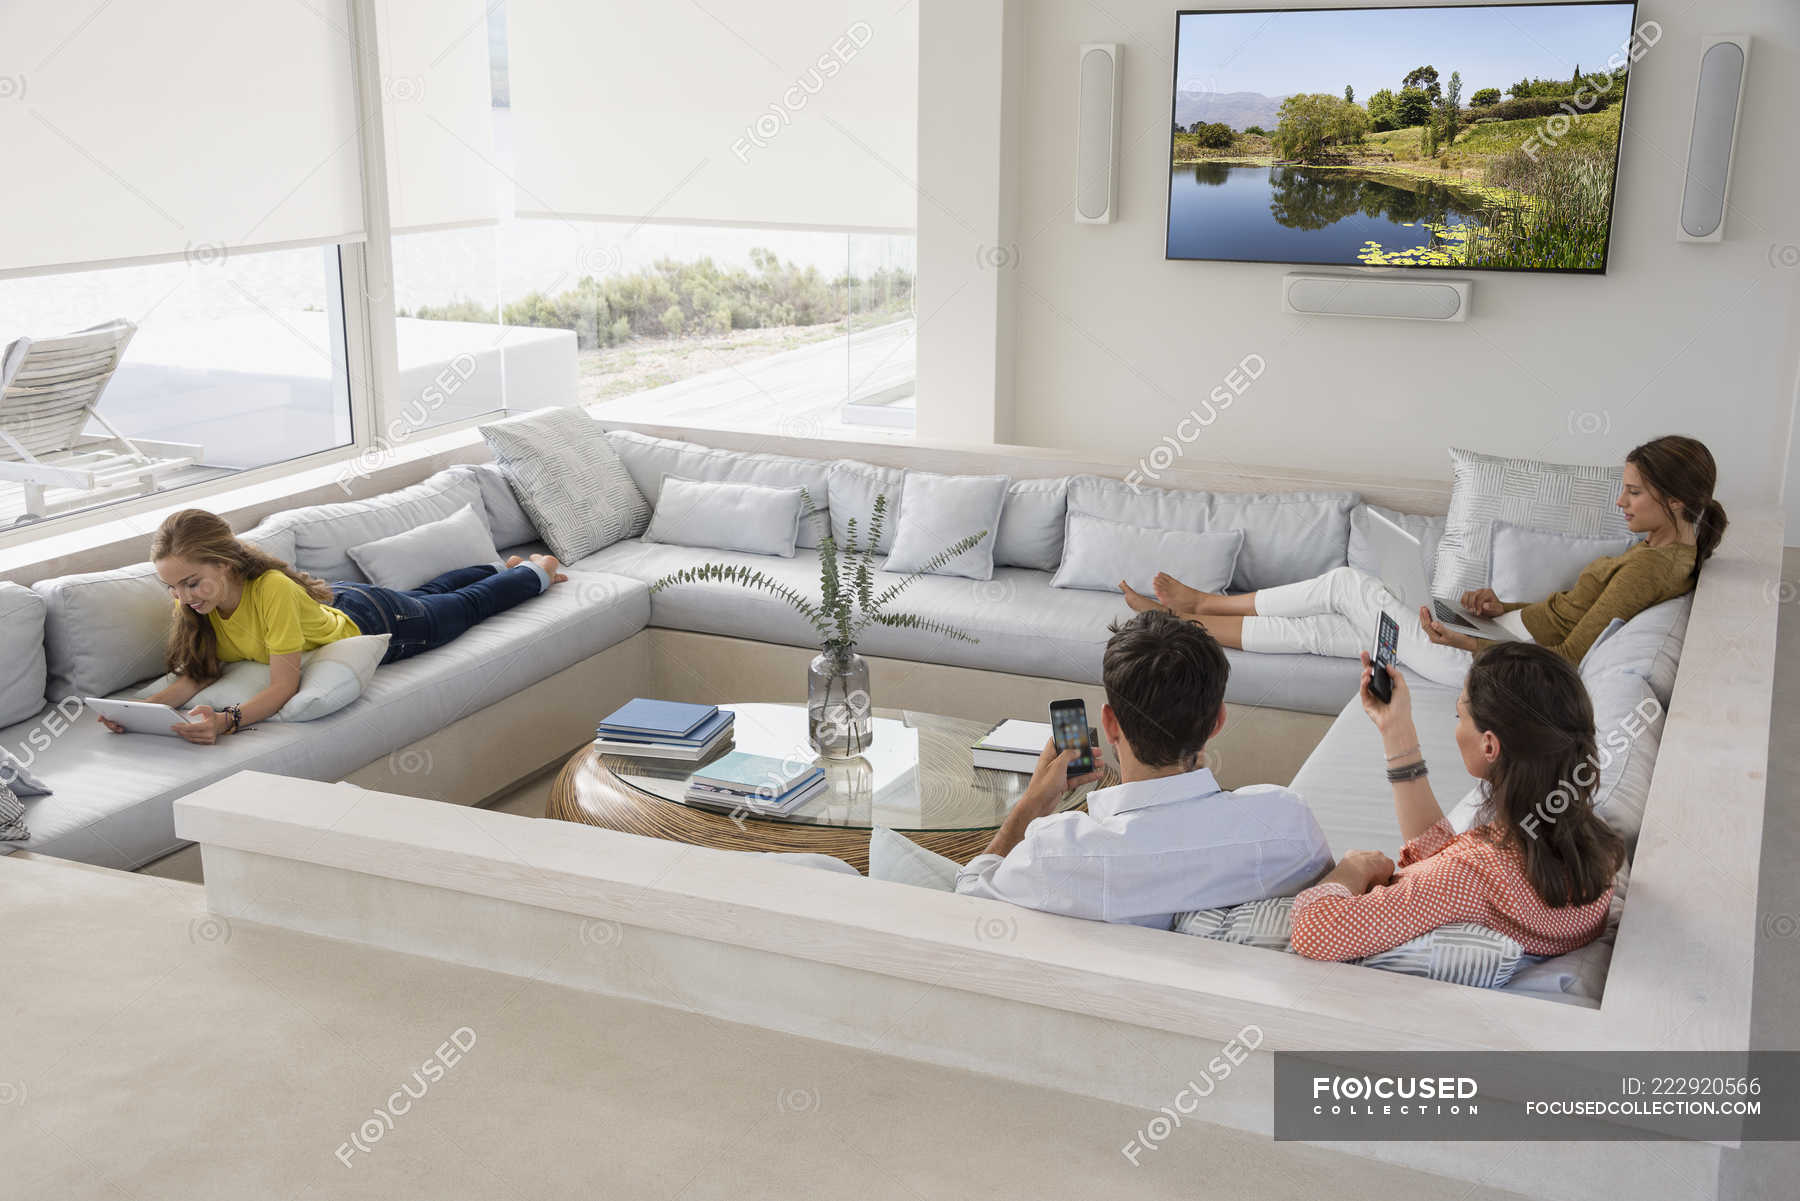 Multi Generation Family Using Gadgets, Living Room And Family